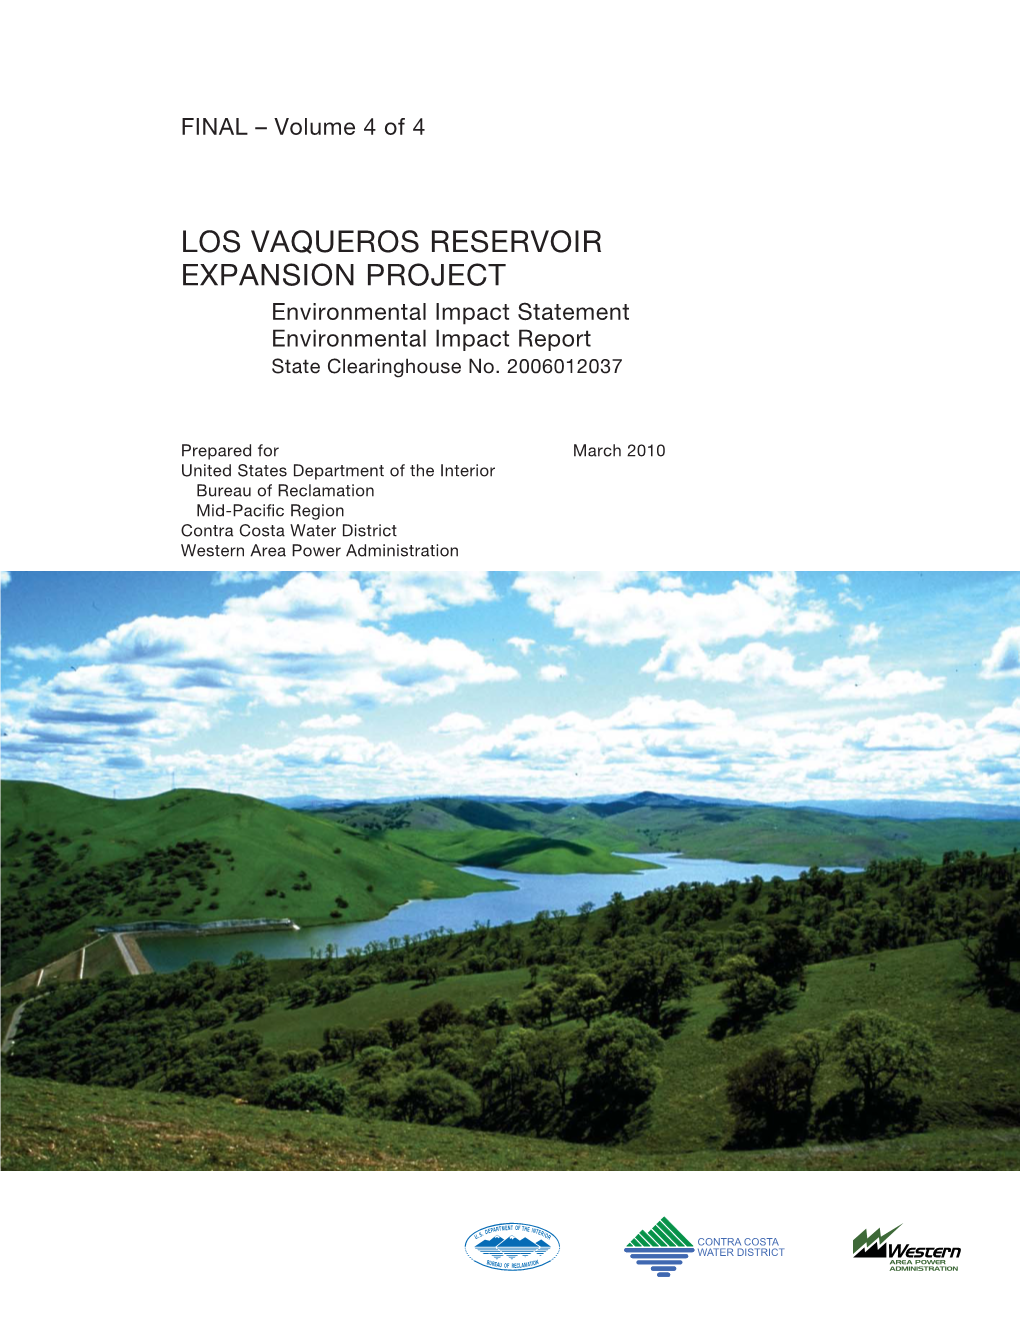 LOS VAQUEROS RESERVOIR EXPANSION PROJECT Environmental Impact Statement Environmental Impact Report State Clearinghouse No